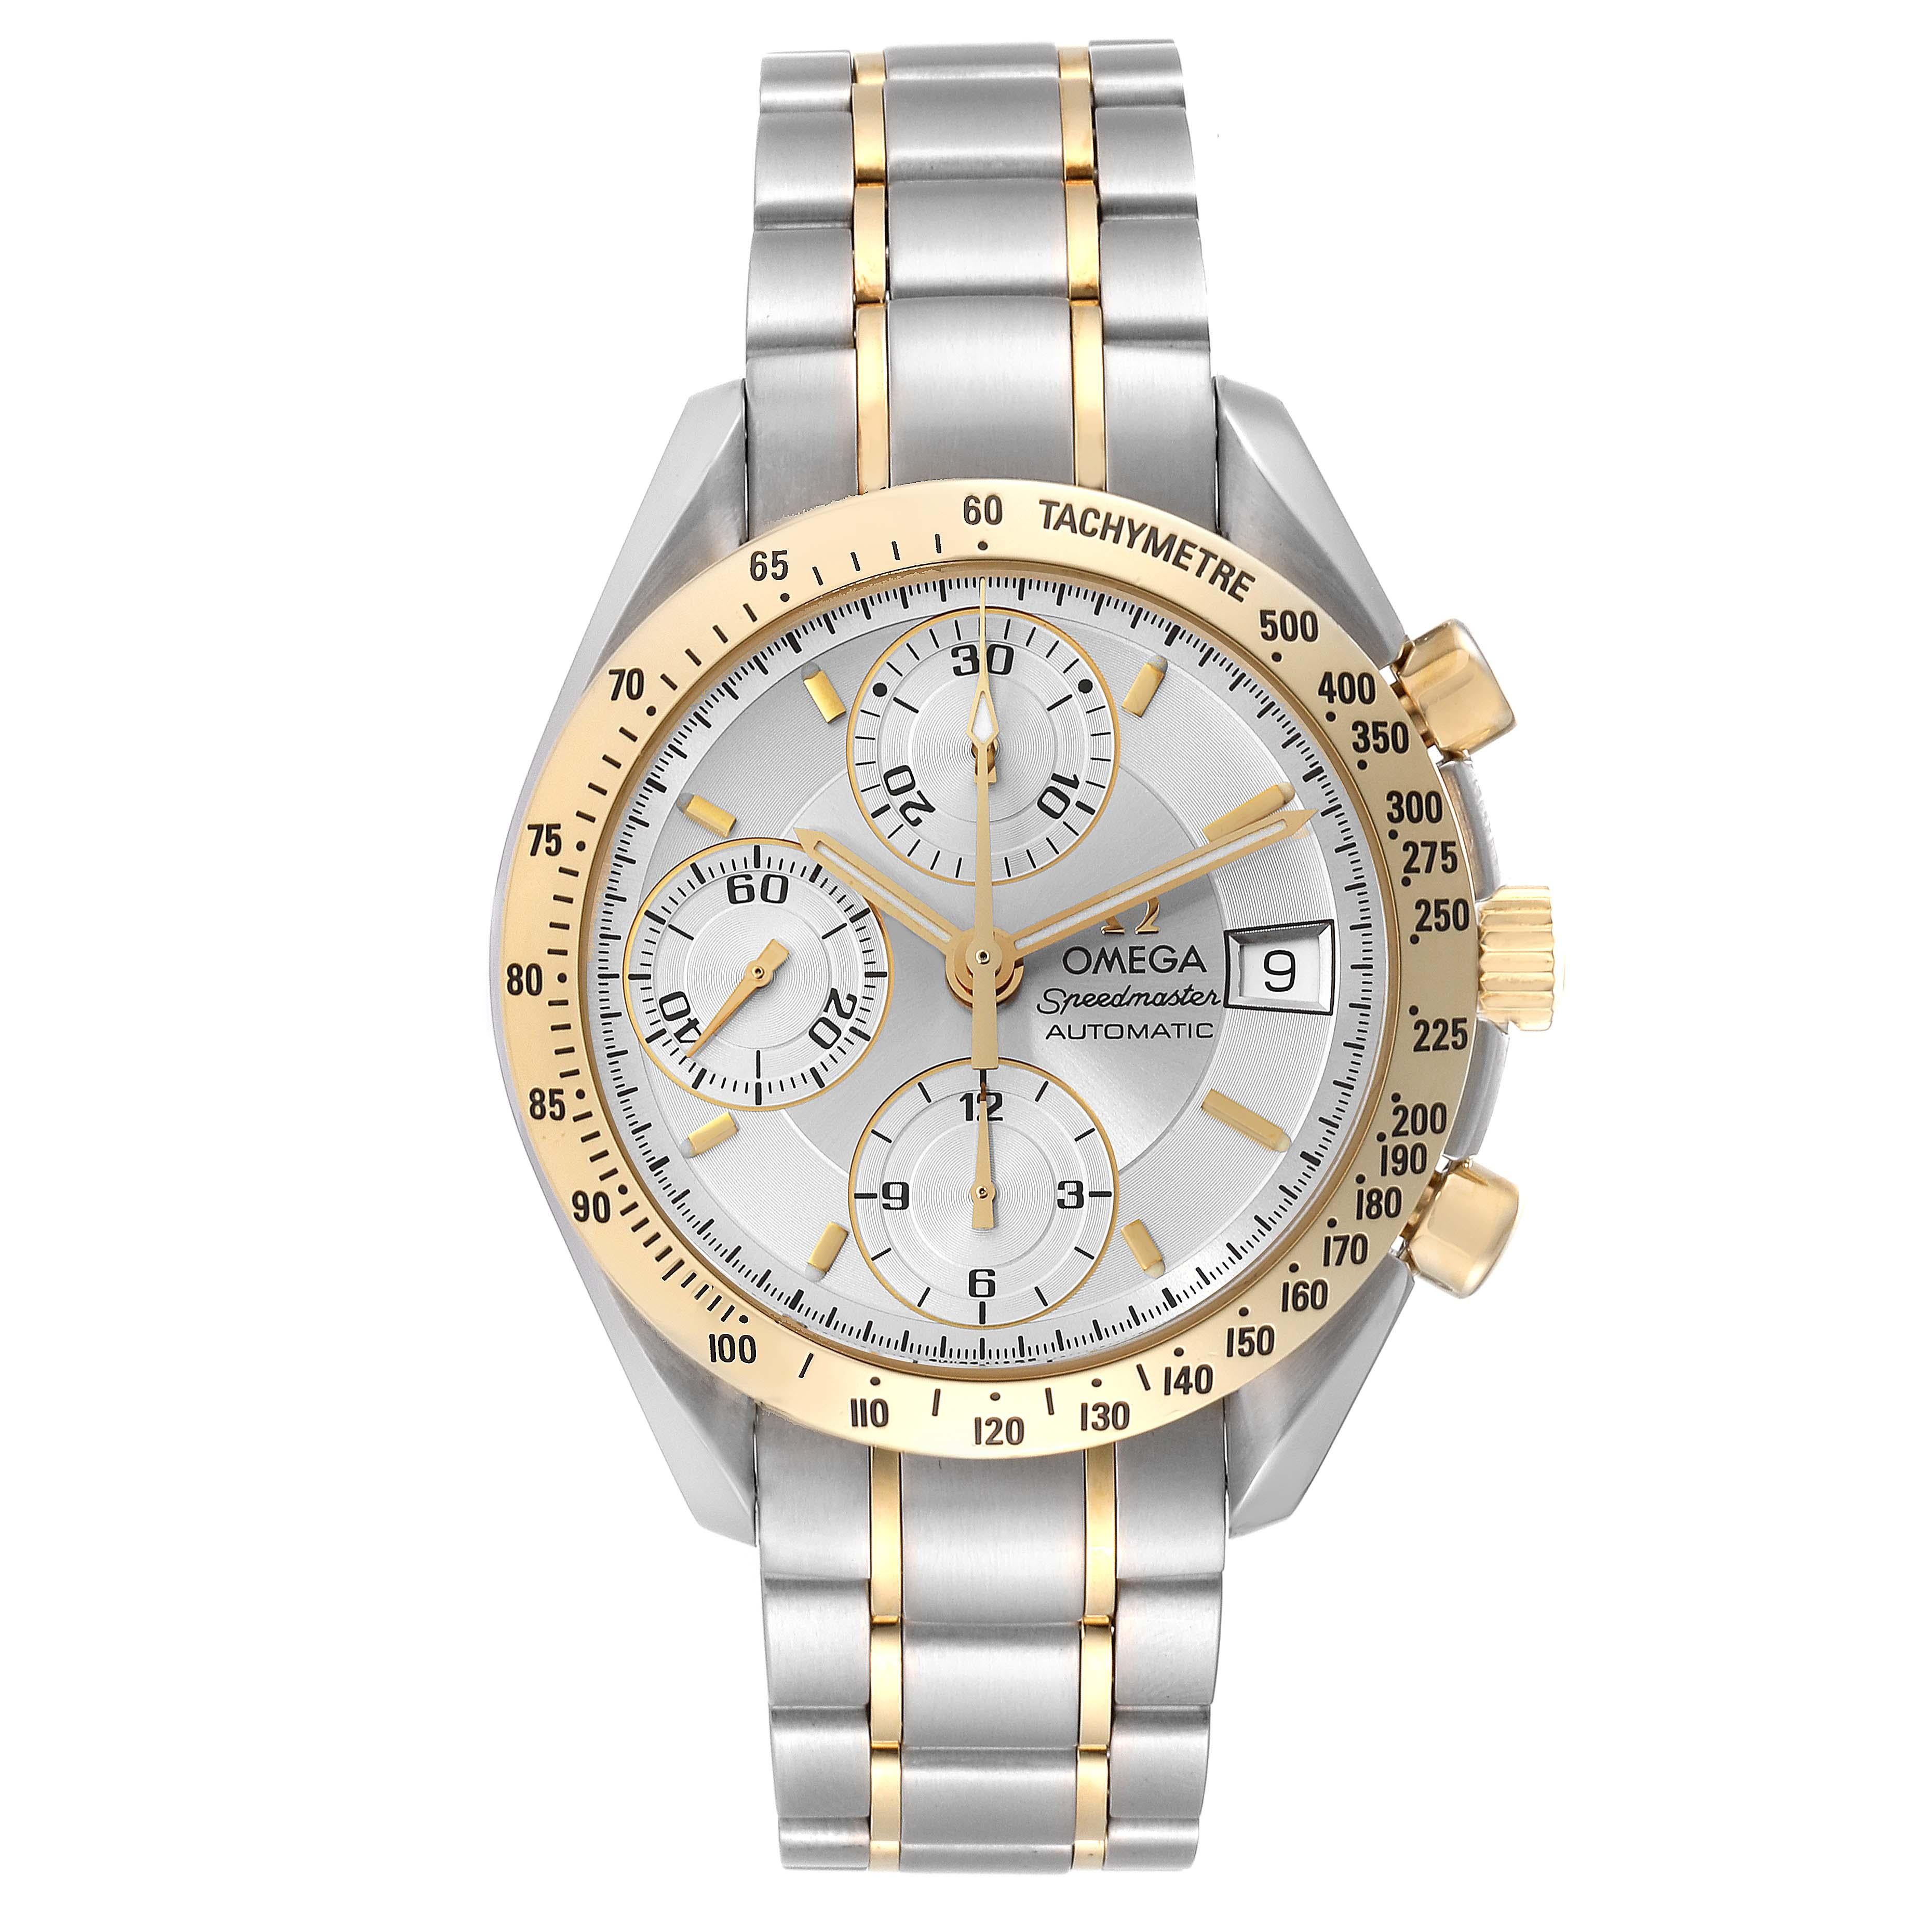 Omega Speedmaster Steel Yellow Gold Automatic Mens Watch 3313.30.00. Automatic self-winding automatic chronograph movement. Stainless steel and 18k yellow gold round case 39.0 mm in diameter. 18k yellow gold bezel with tachymeter function.